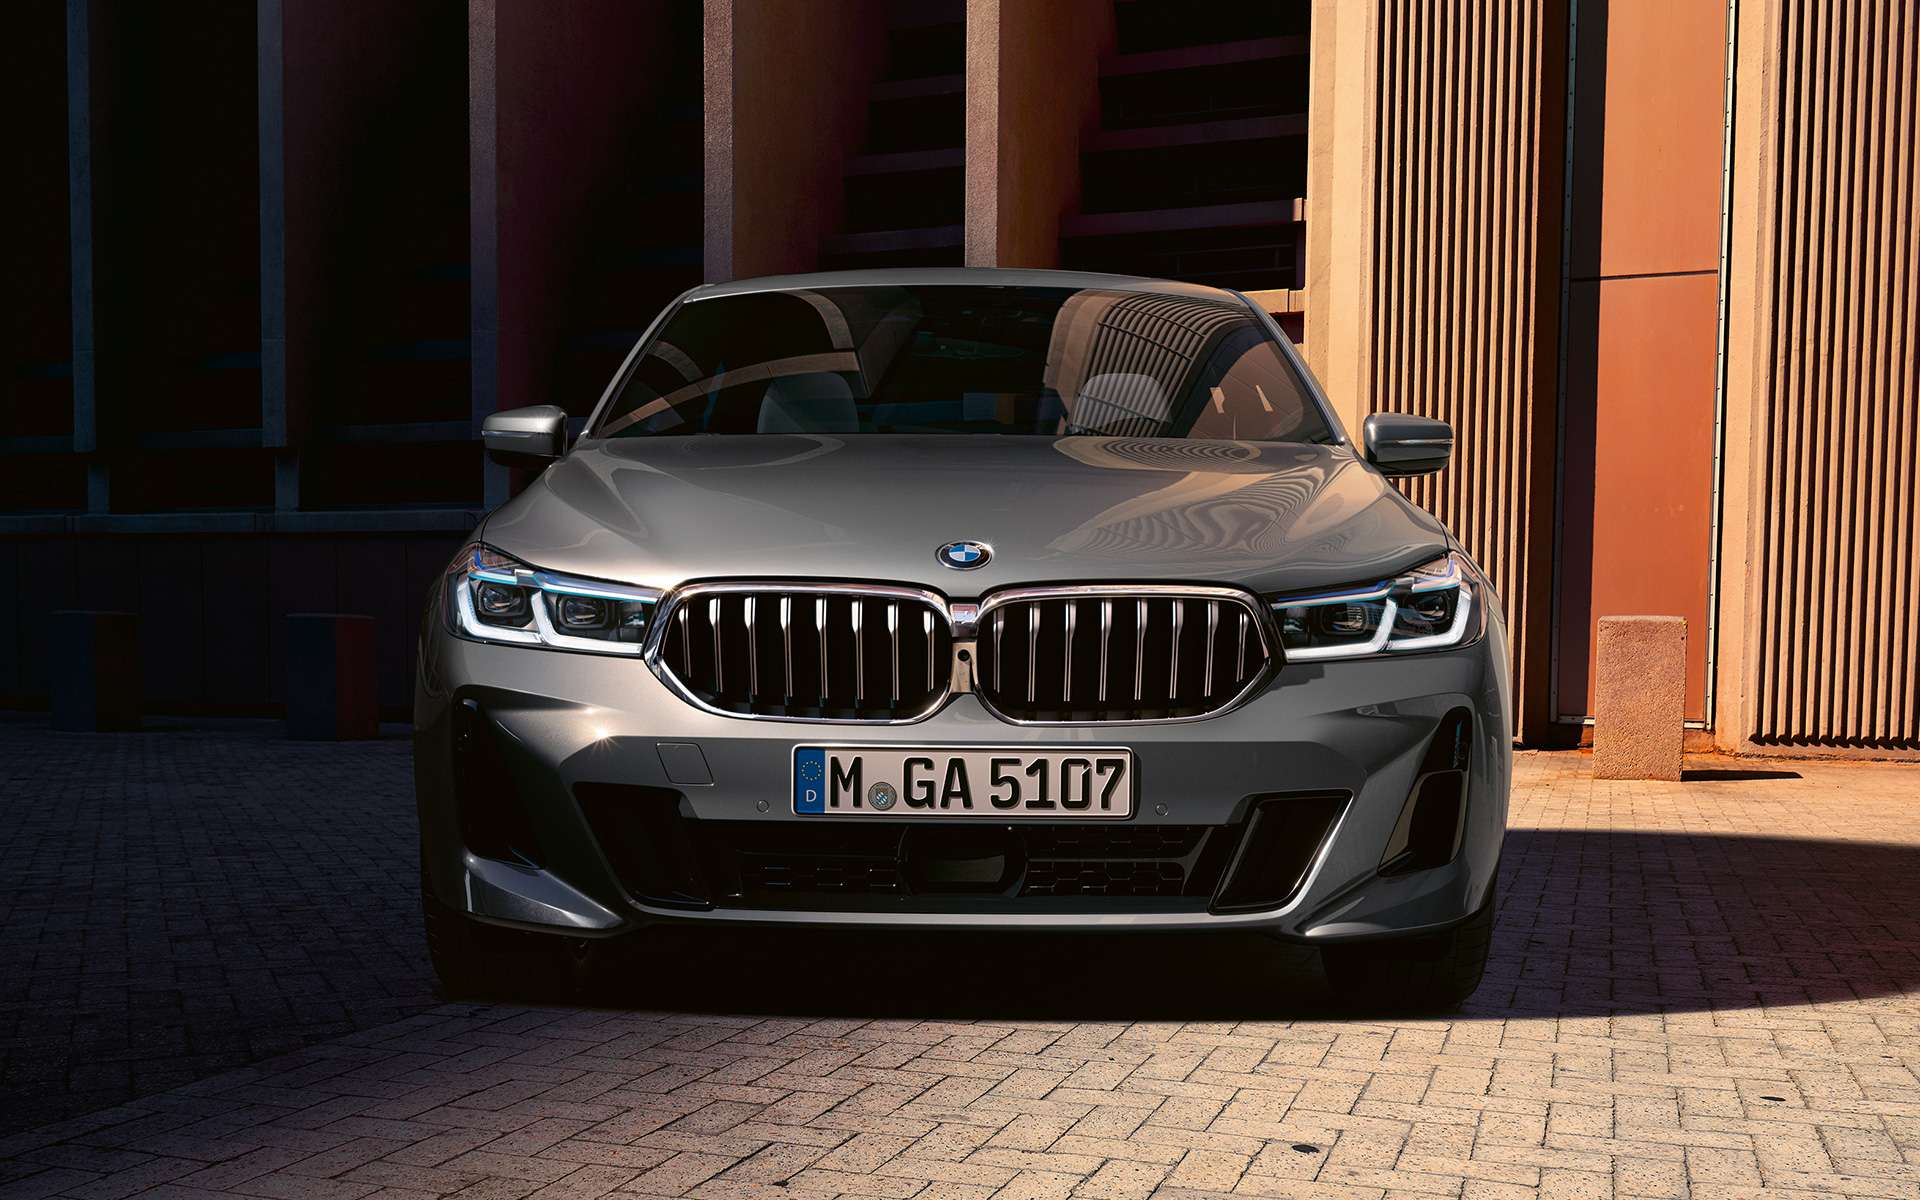 BMW may stop production of its BMW 6 series Gran Turismo Soon